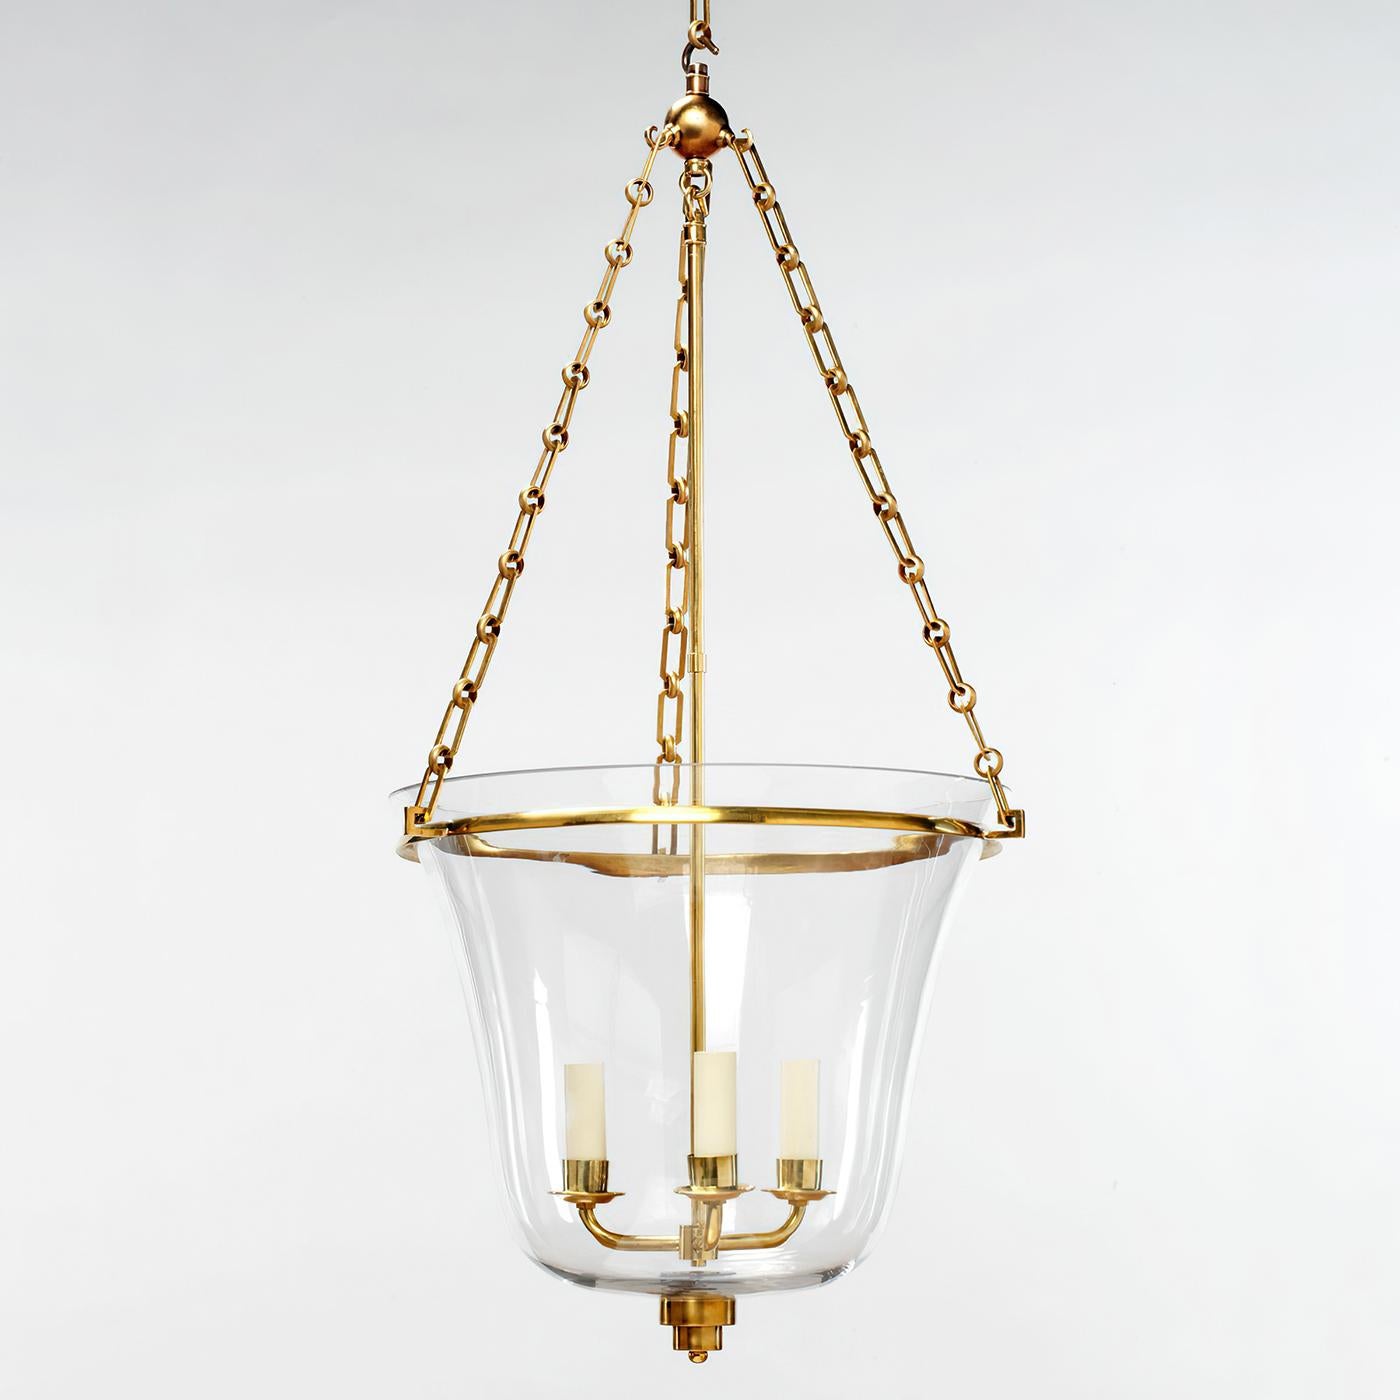 This design features a graceful hand-blown glass bell. The glass is paired with a sleek cast brass circular band and Art Deco style finial. The lantern has a solid cast brass frame and decorative components.

The close-up shows the hand-blown